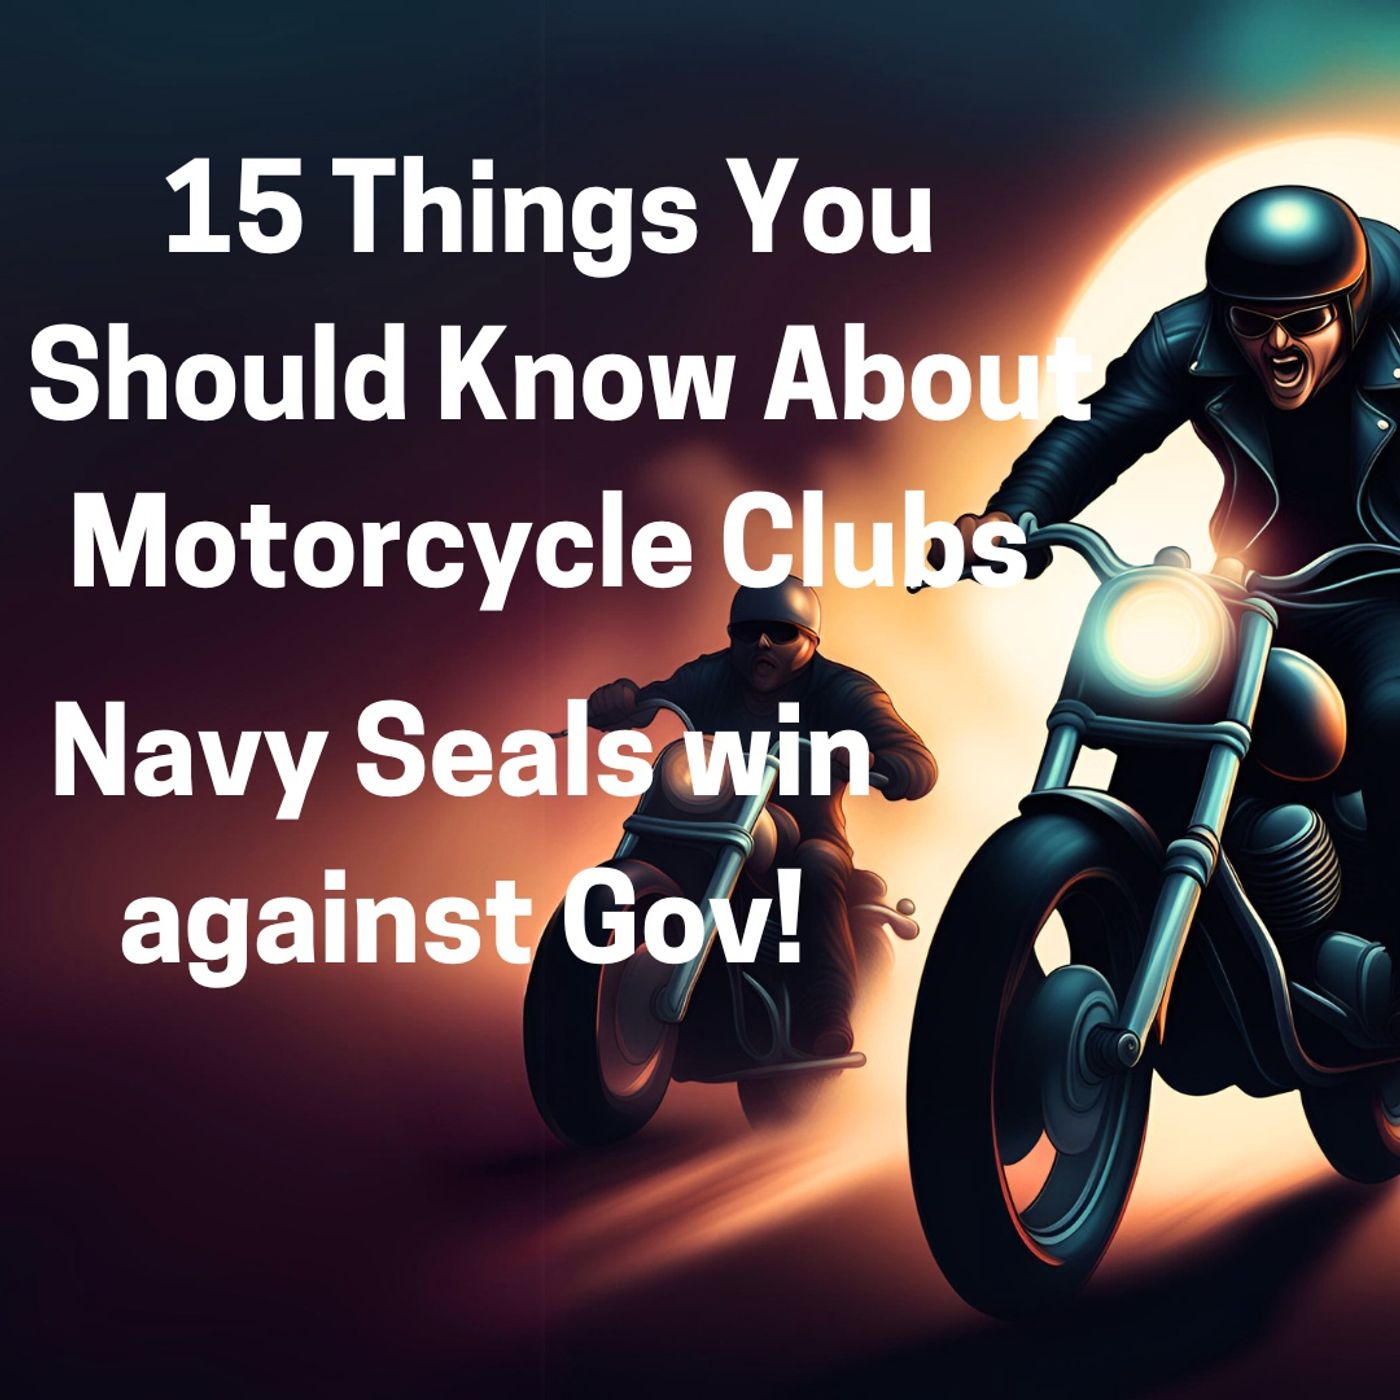 15 Things to Know About Motorcycle Clubs + Navy SEALS Win Against Gov